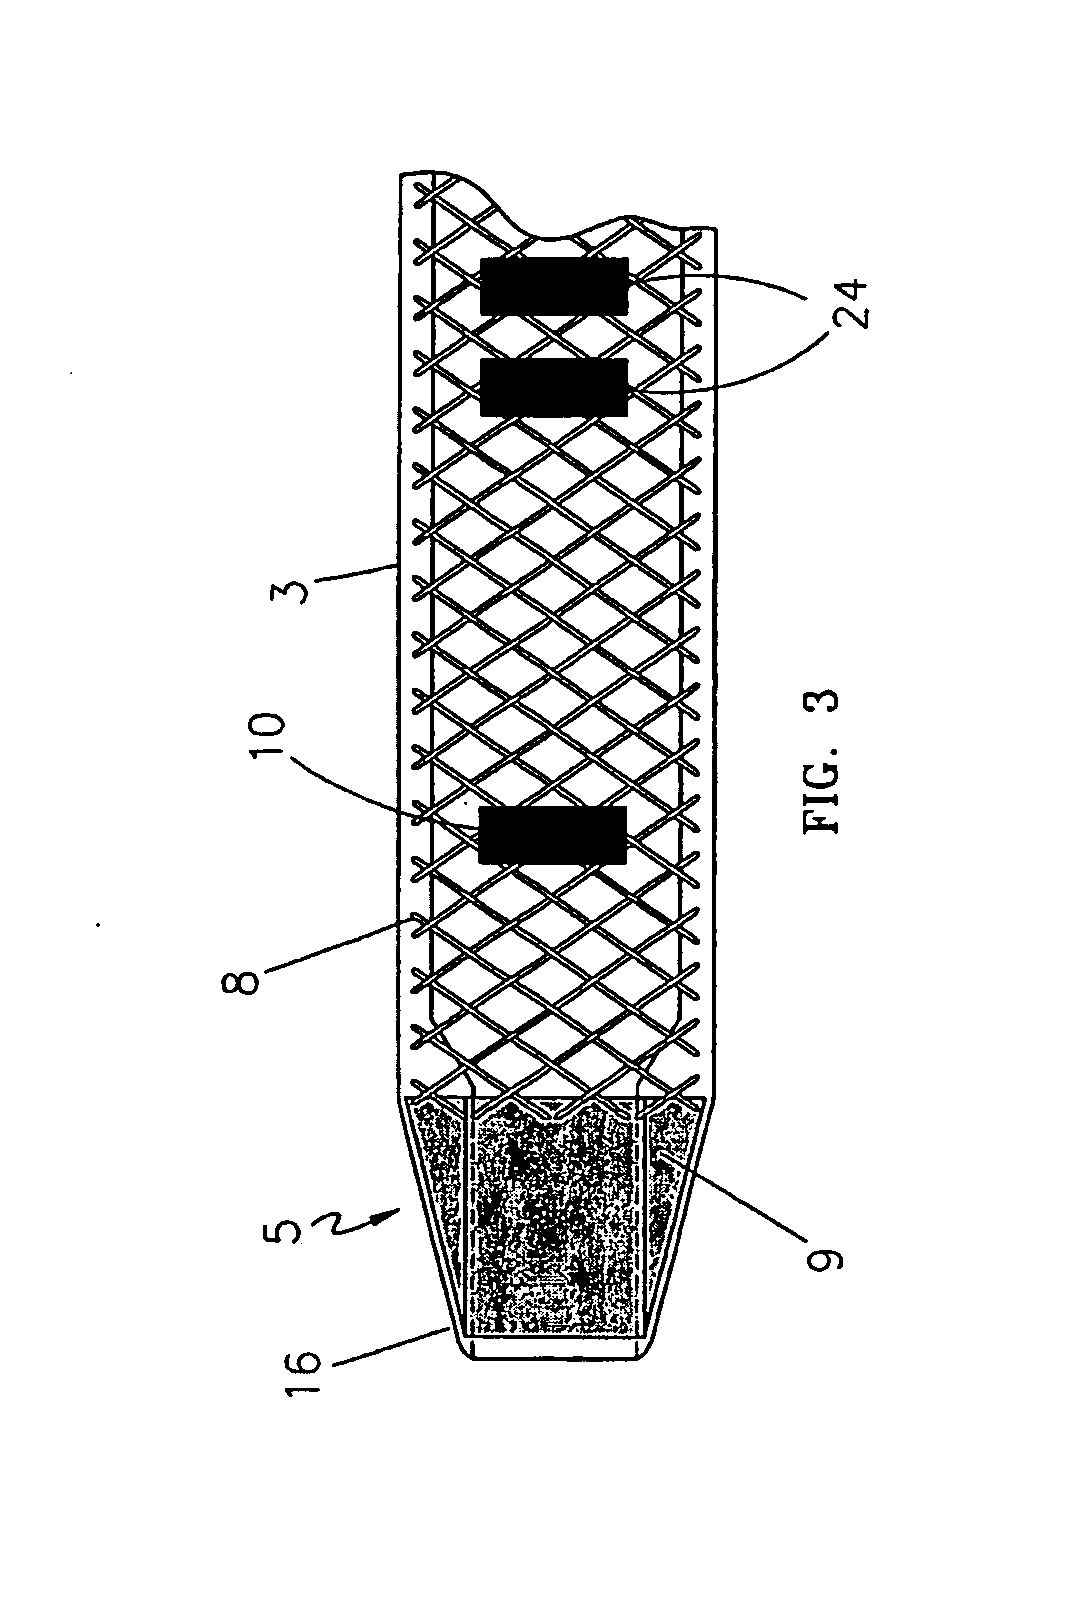 Endovascular treatment apparatus and method